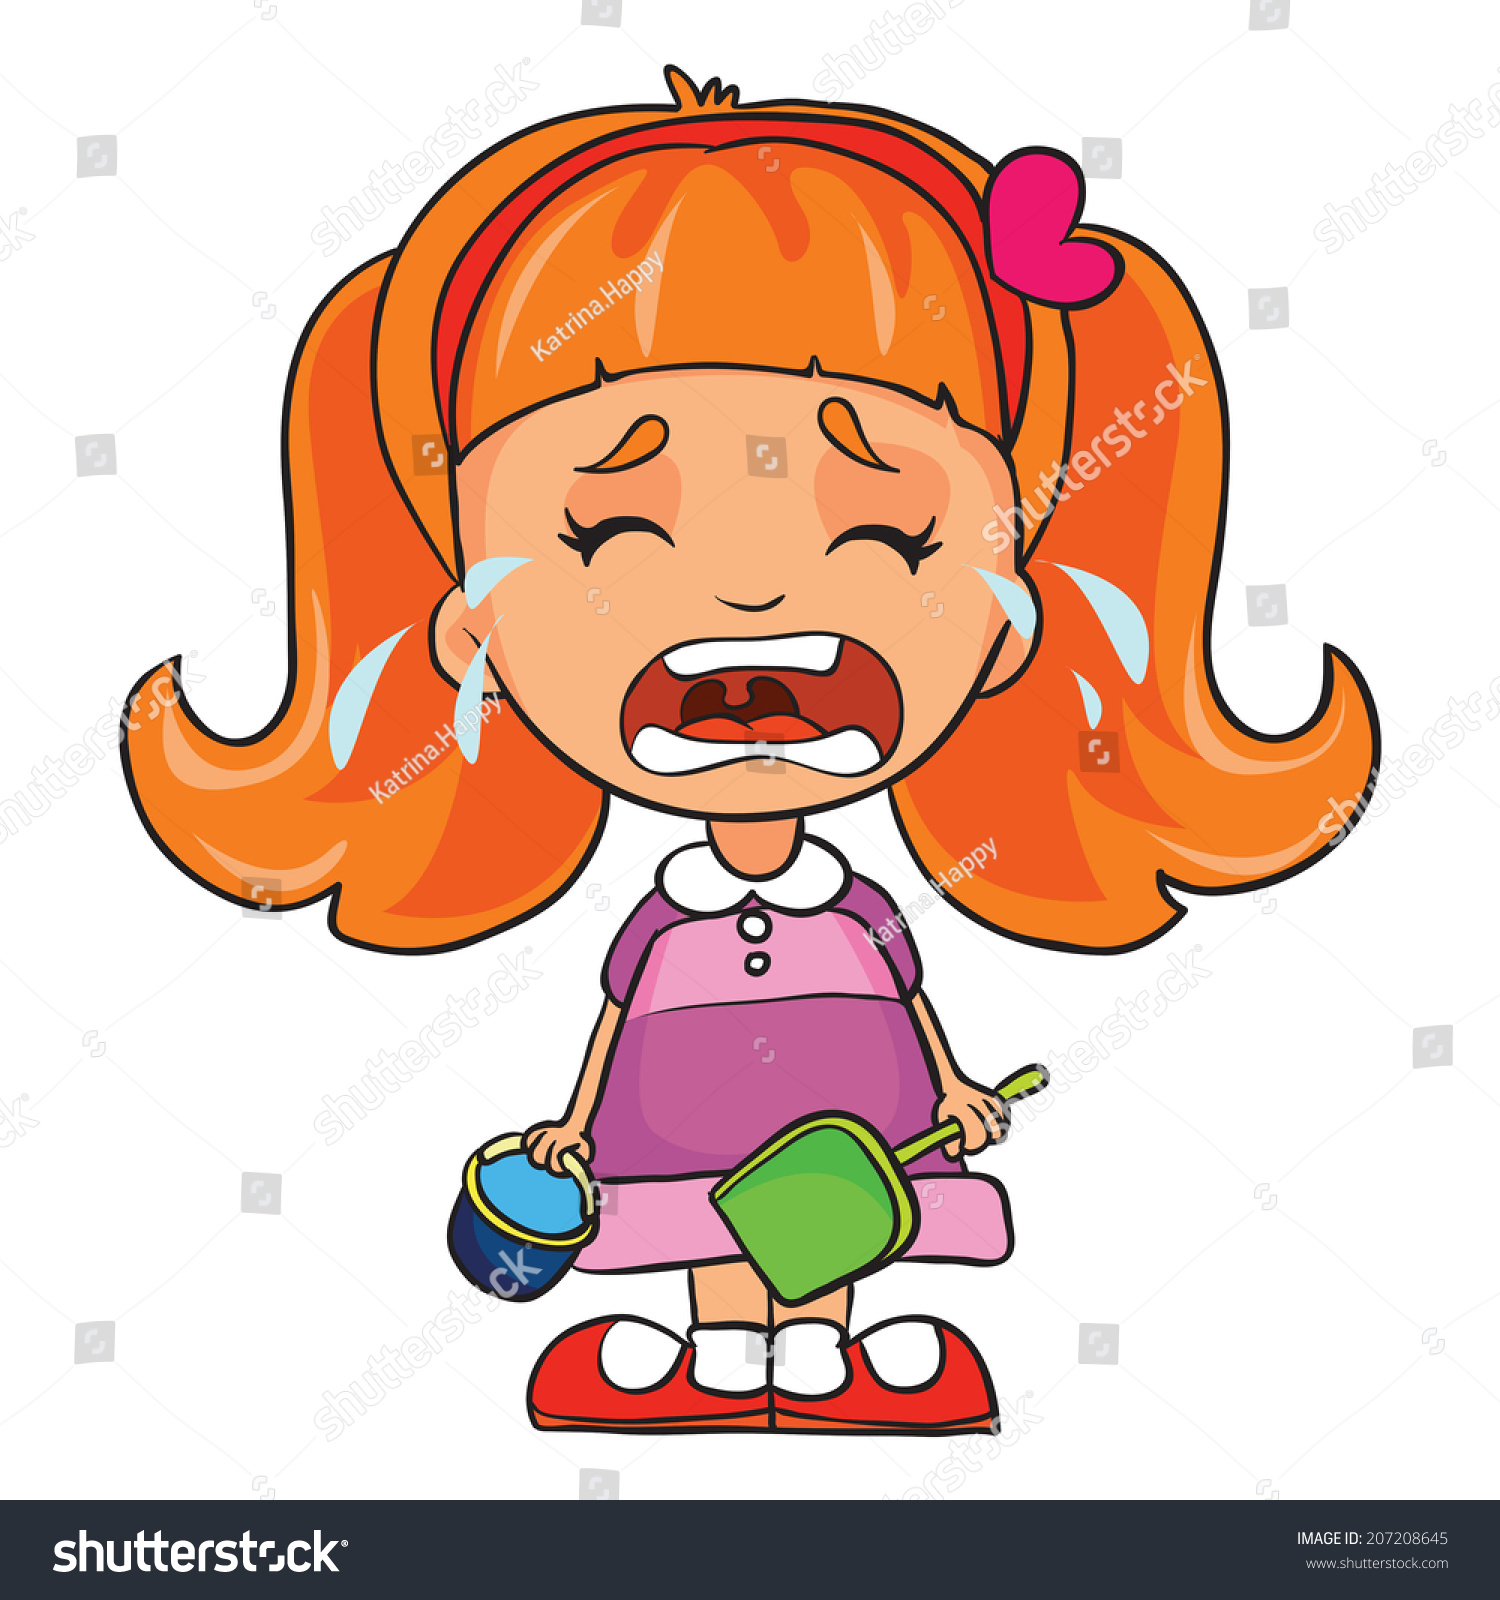 Download Cute Girl Crying Vector Illustration On Stock Vector (Royalty Free) 207208645 - Shutterstock